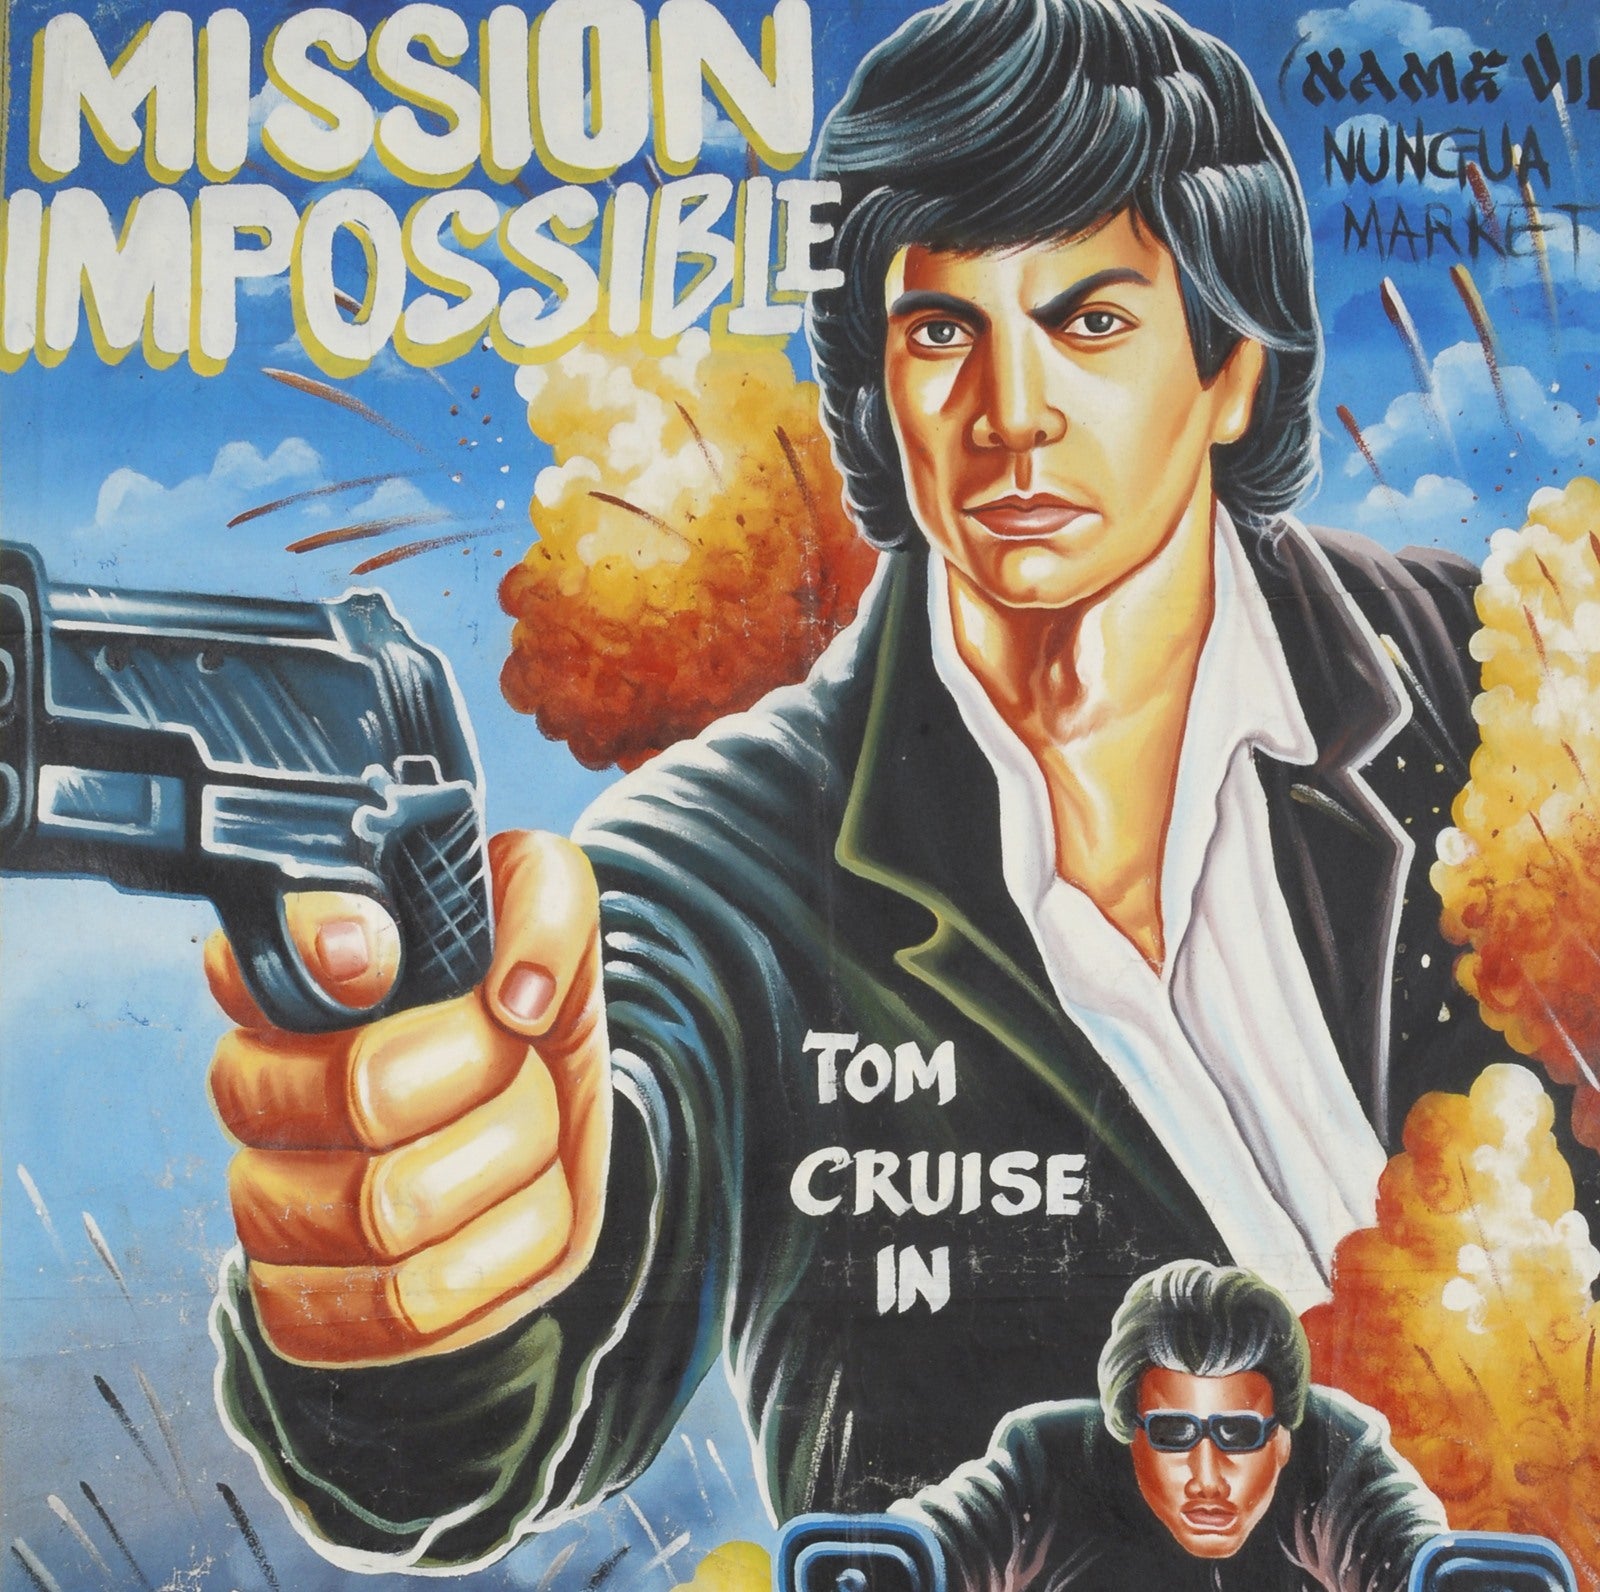 MISSION IMPOSSIBLE MOVIE POSTER HAND PAINTED IN GHANA FOR THE LOCAL CINEMA DETAILS